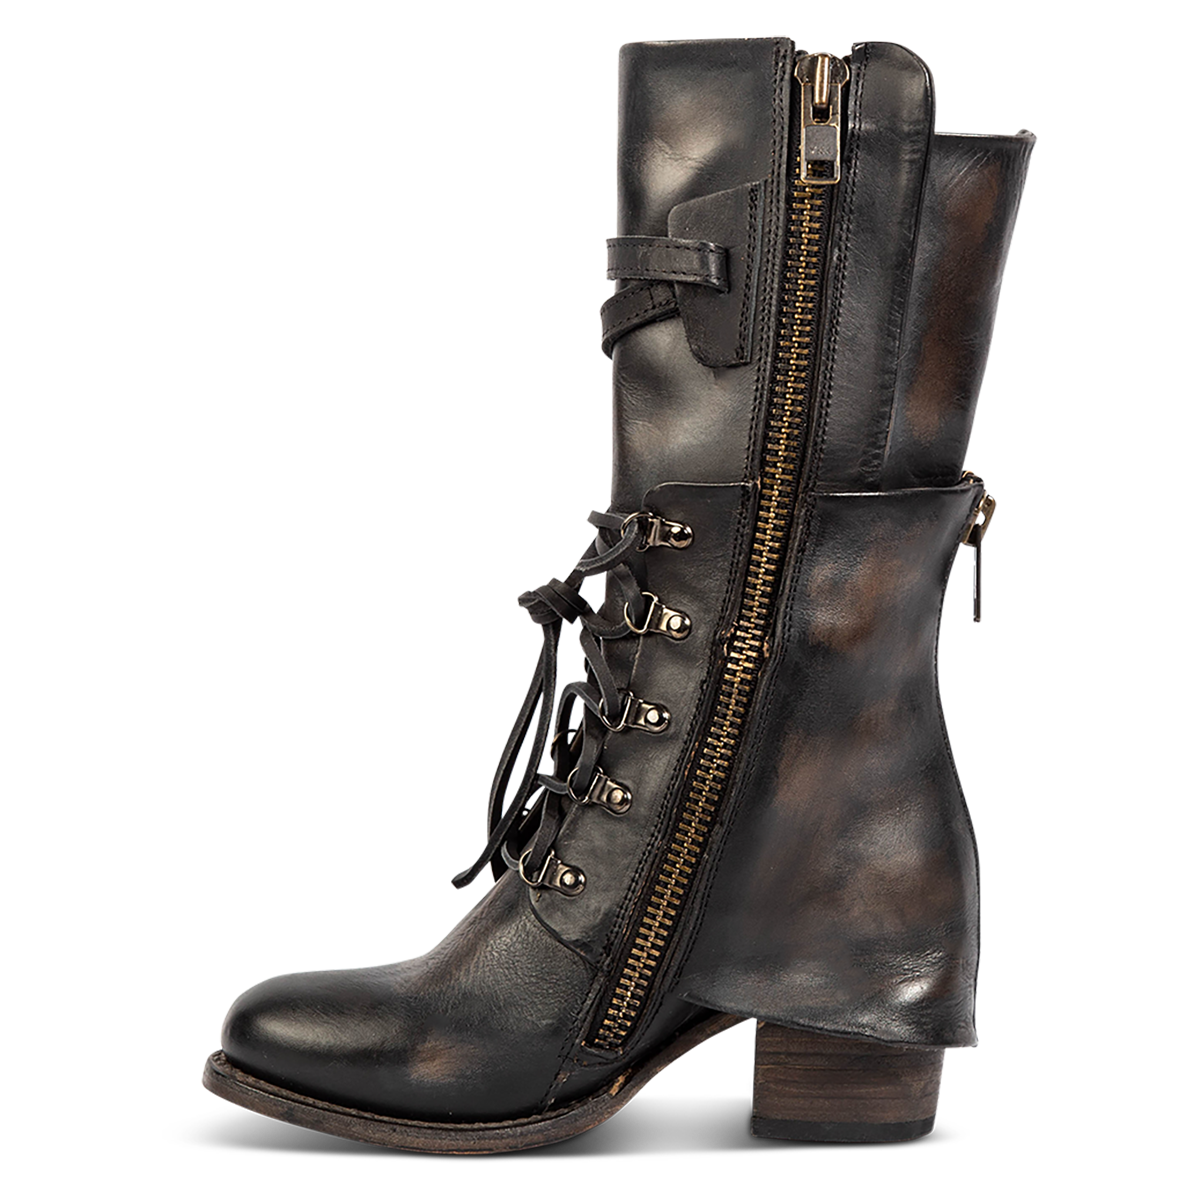 Inside view showing a full inside working brass zipper, stacked heel and leather shaft overlay on FREEBIRD women's Caboose black leather boot 